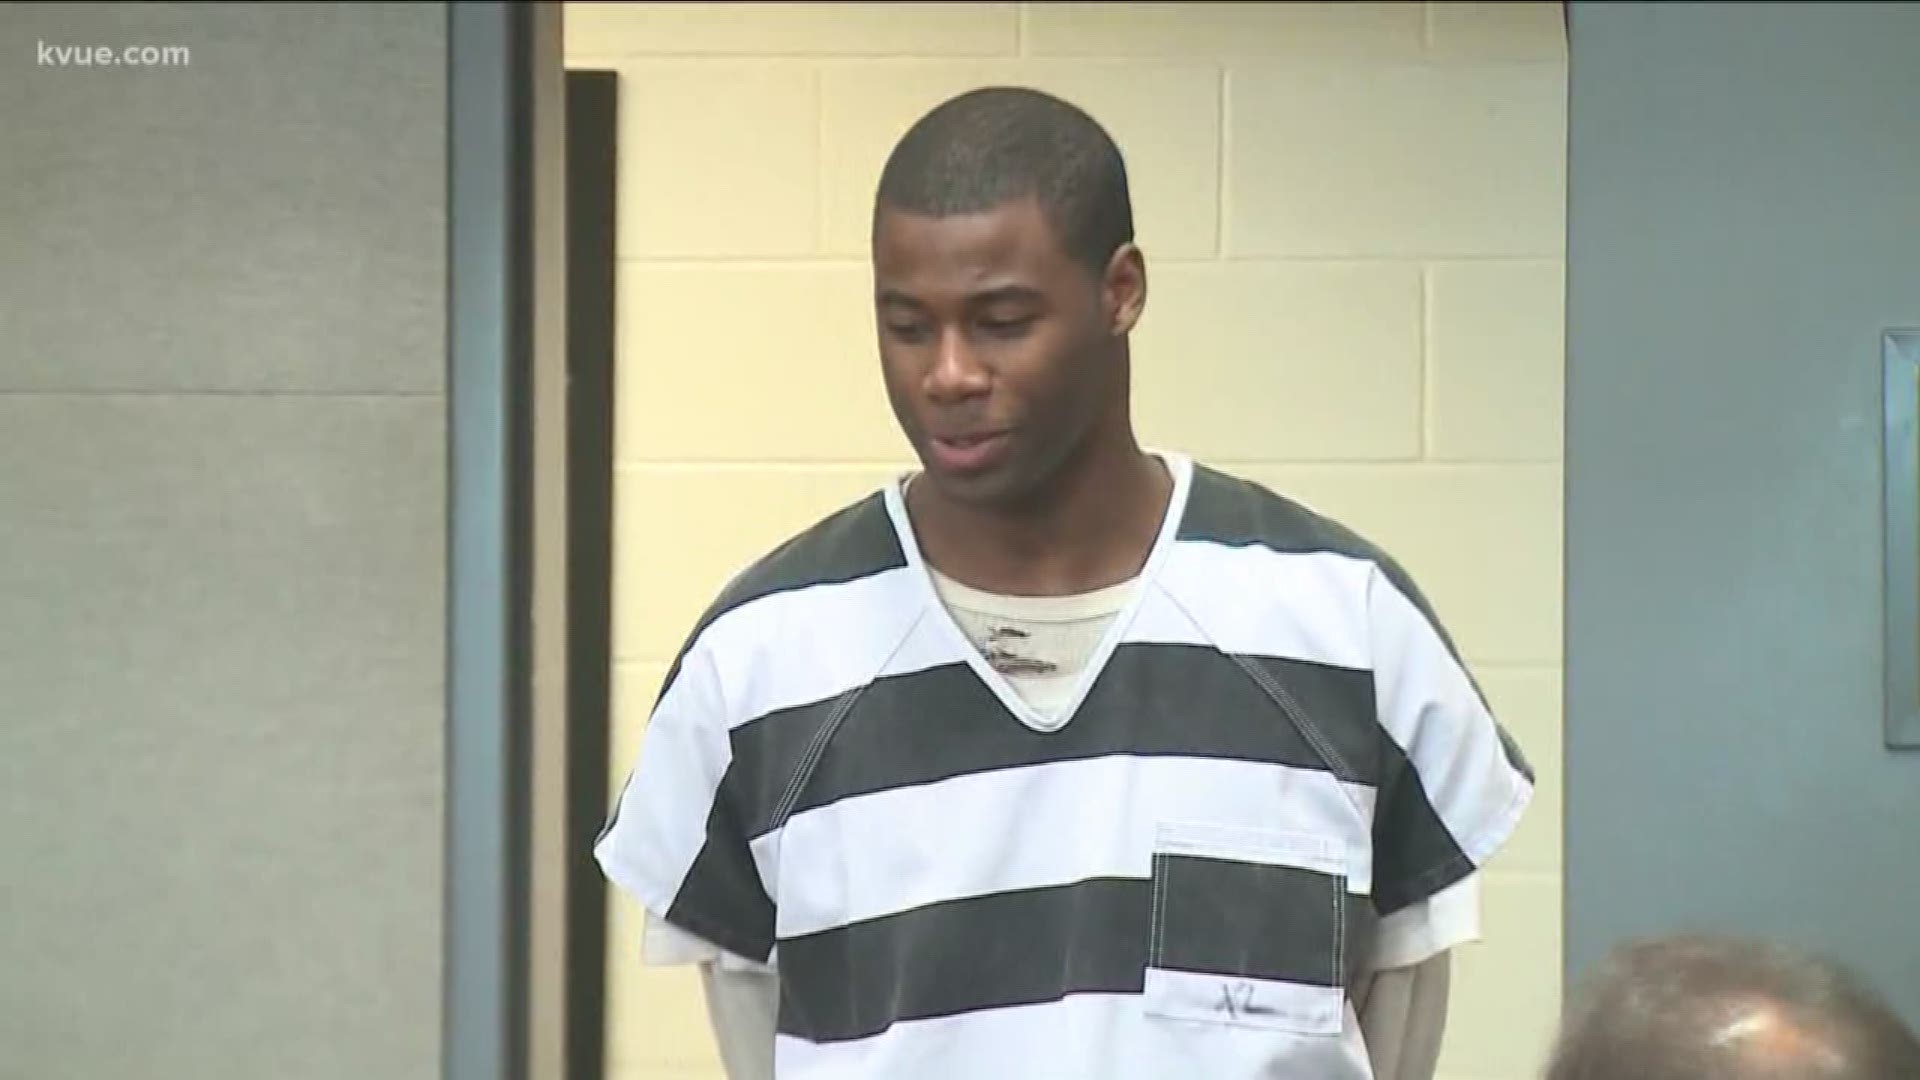 The man convicted of killing a UT student will not get a new trial.